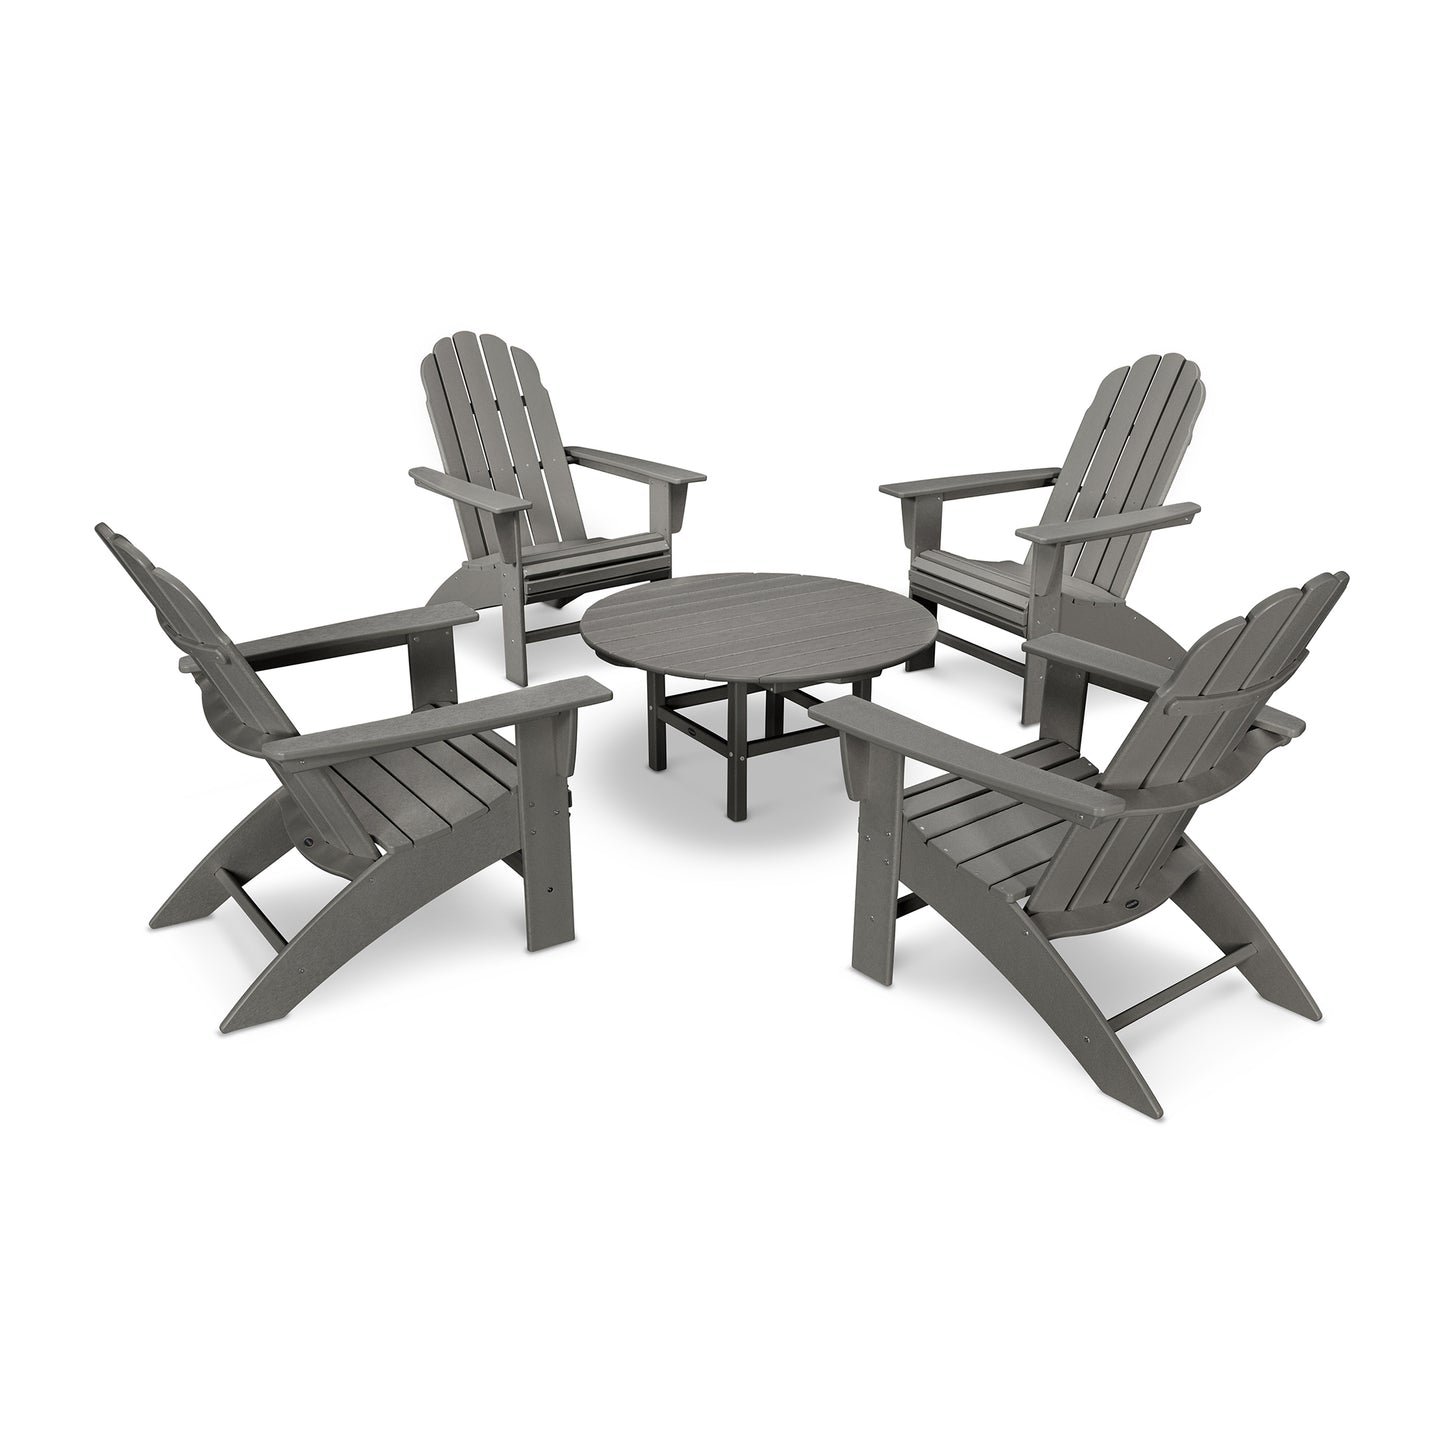 Four gray POLYWOOD Vineyard Adirondack chairs arranged around a small, round table on a white background, depicting a casual outdoor seating set-up.